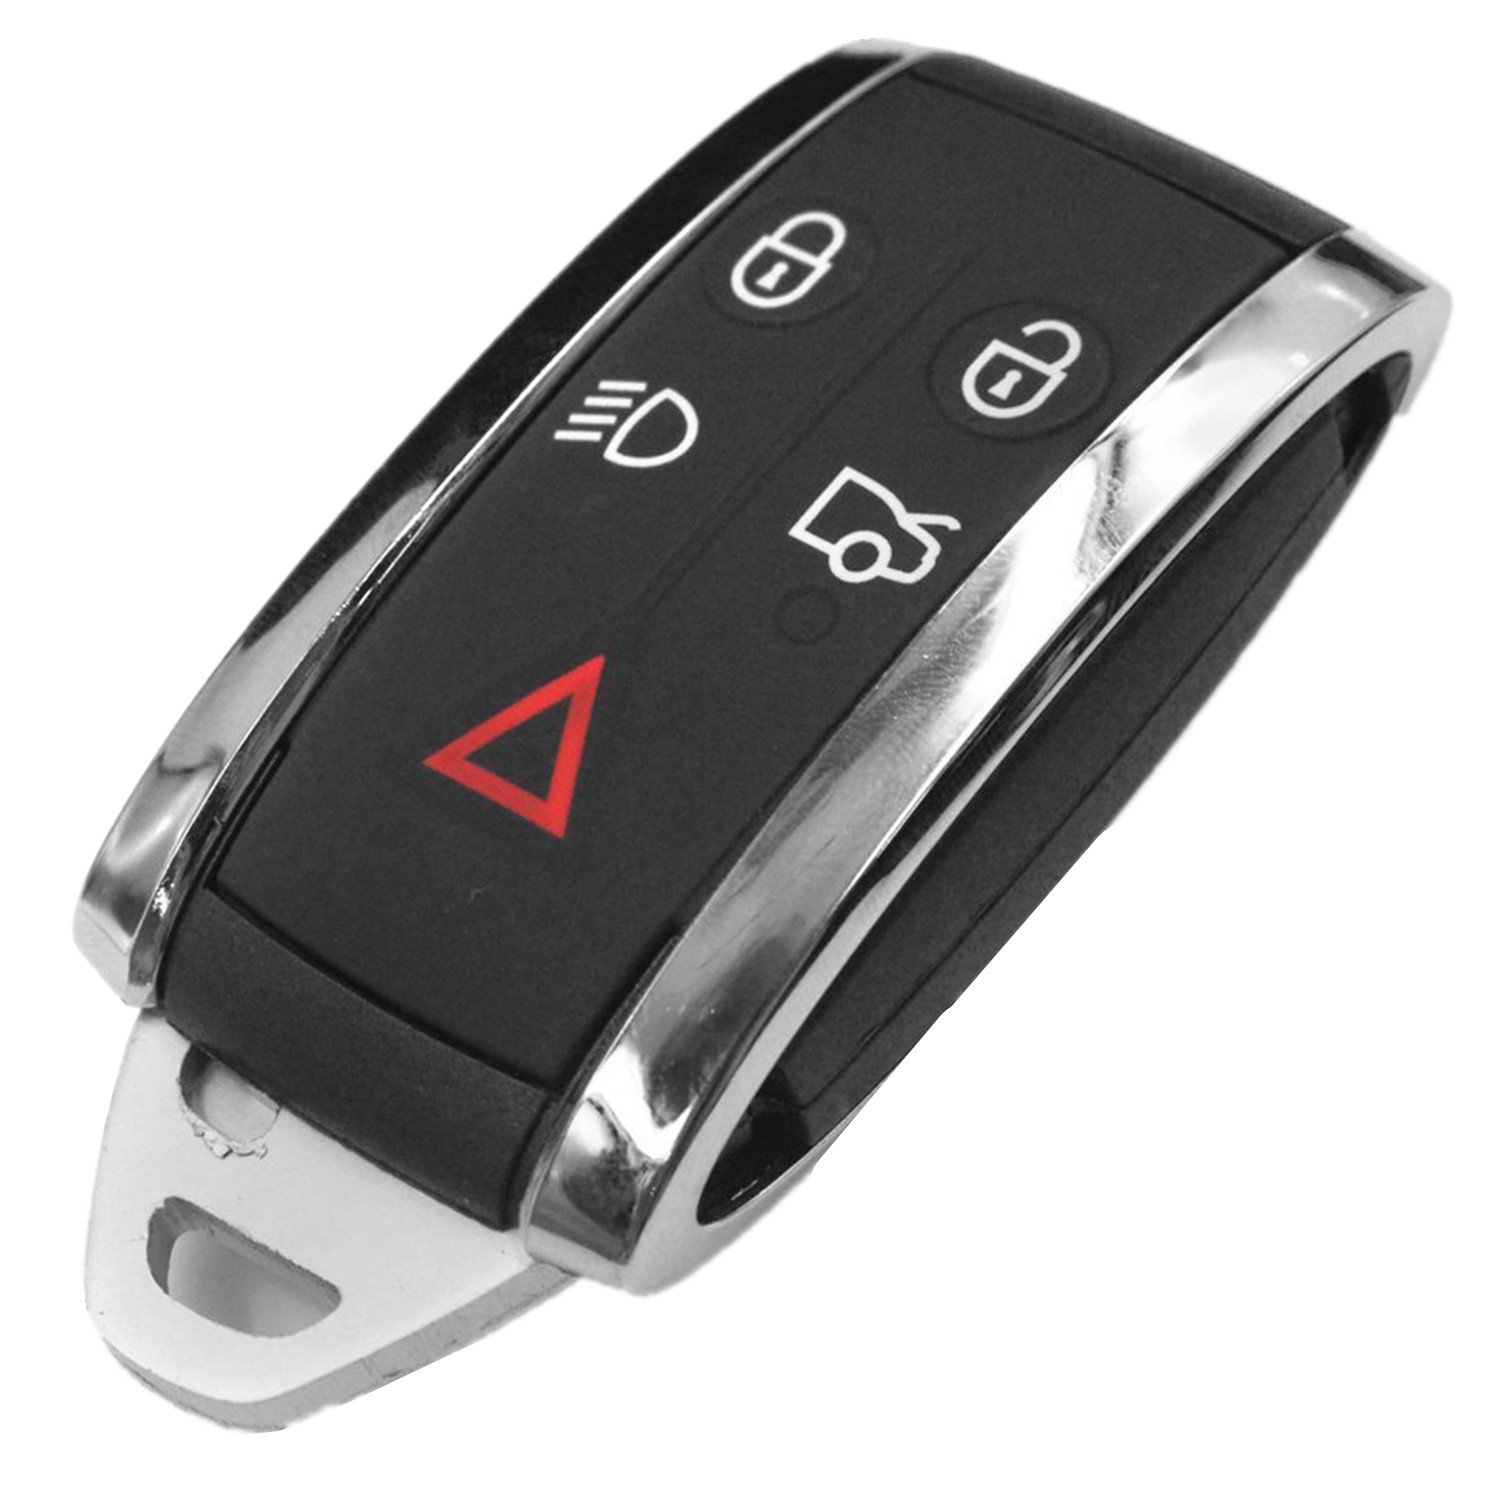 Can key fob manufacturers customize key fobs to meet the specific branding or design requirements of automotive companies?